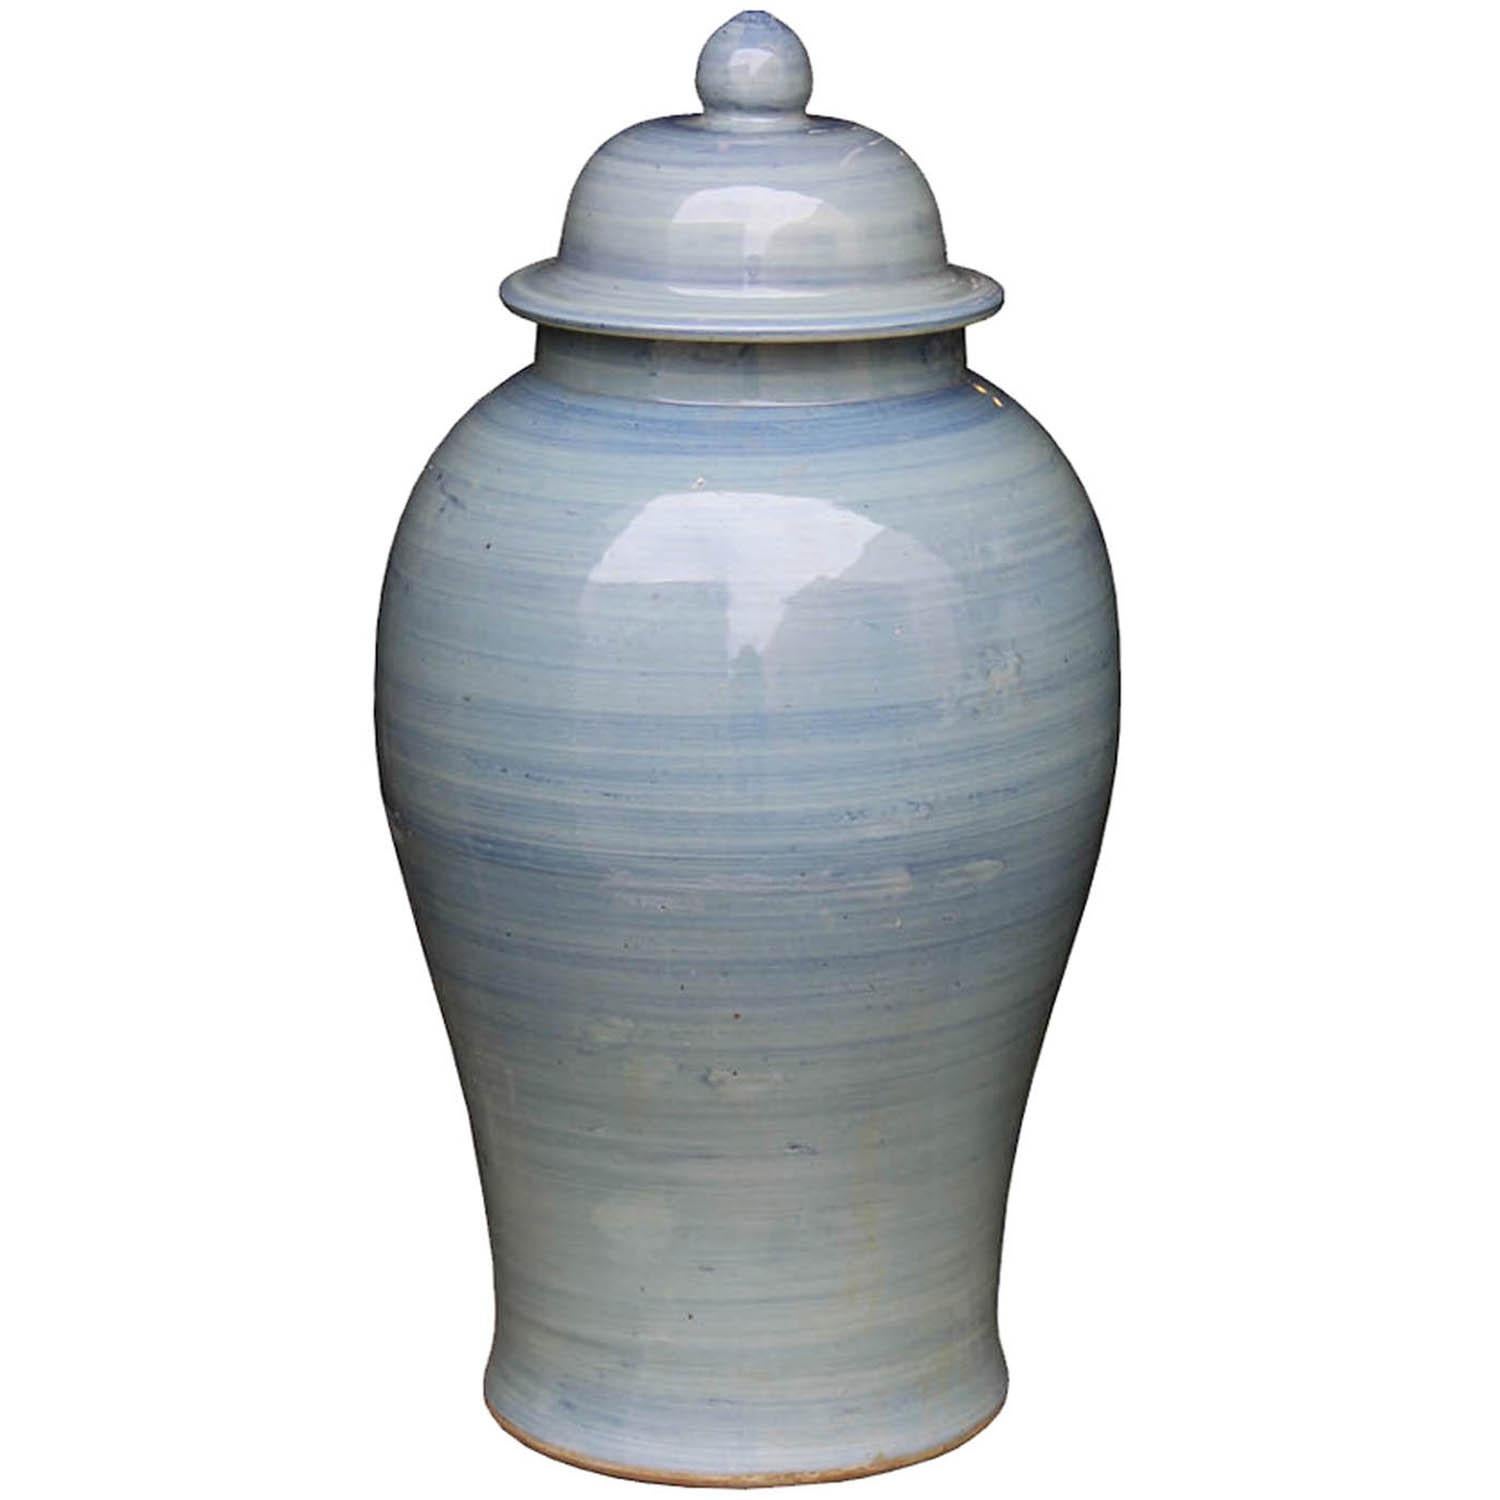 Contemporary ceramic ginger jar has been hand painted in varying shades of blue.  Use on a dining table, buffet or on book shelf.  Available and priced individually. Jar on the right is 21-1/2